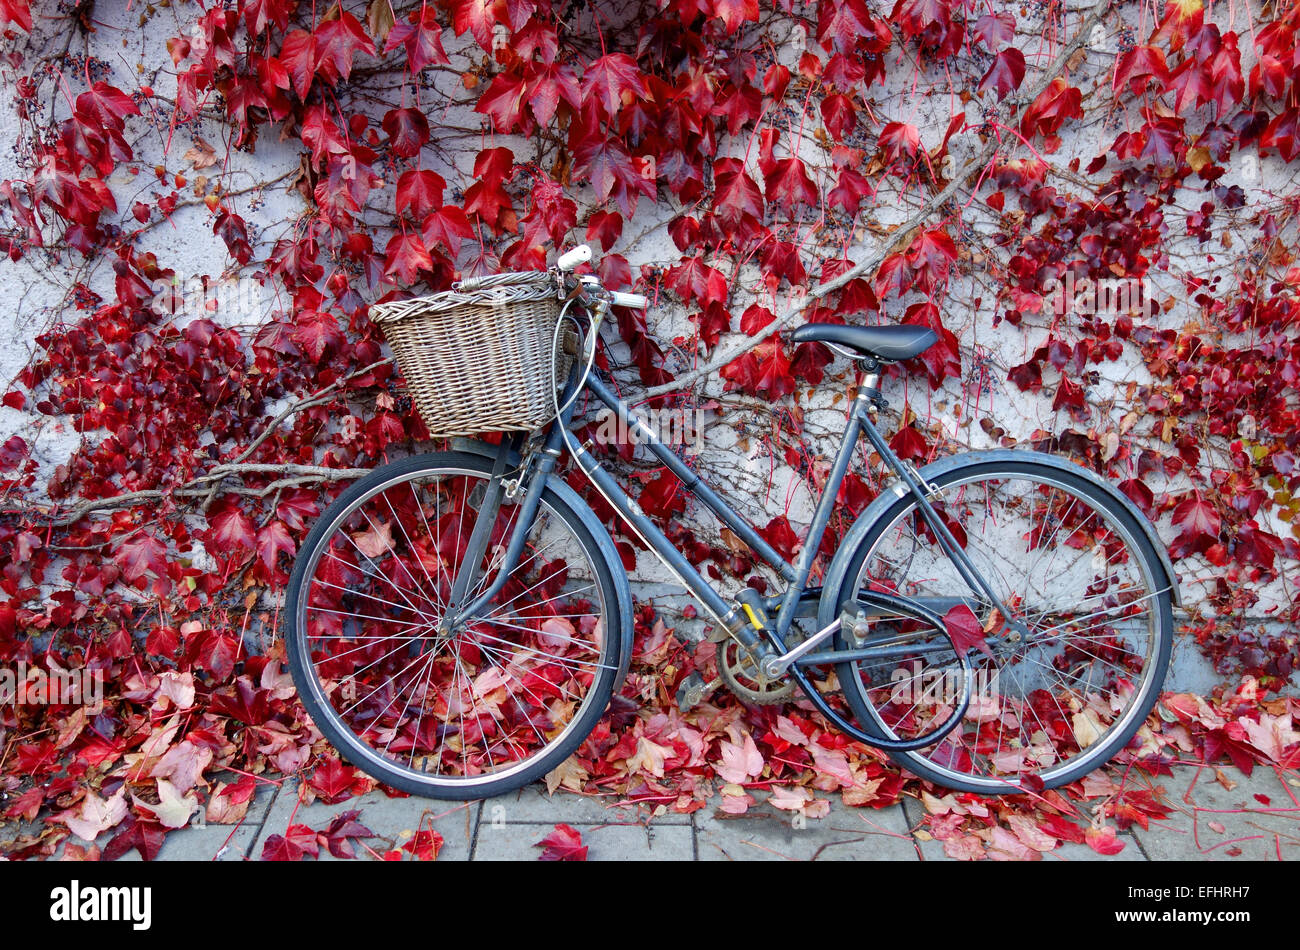 Bicycle leaning against red autumnal leaves, Oxford, Britain, UK Stock Photo